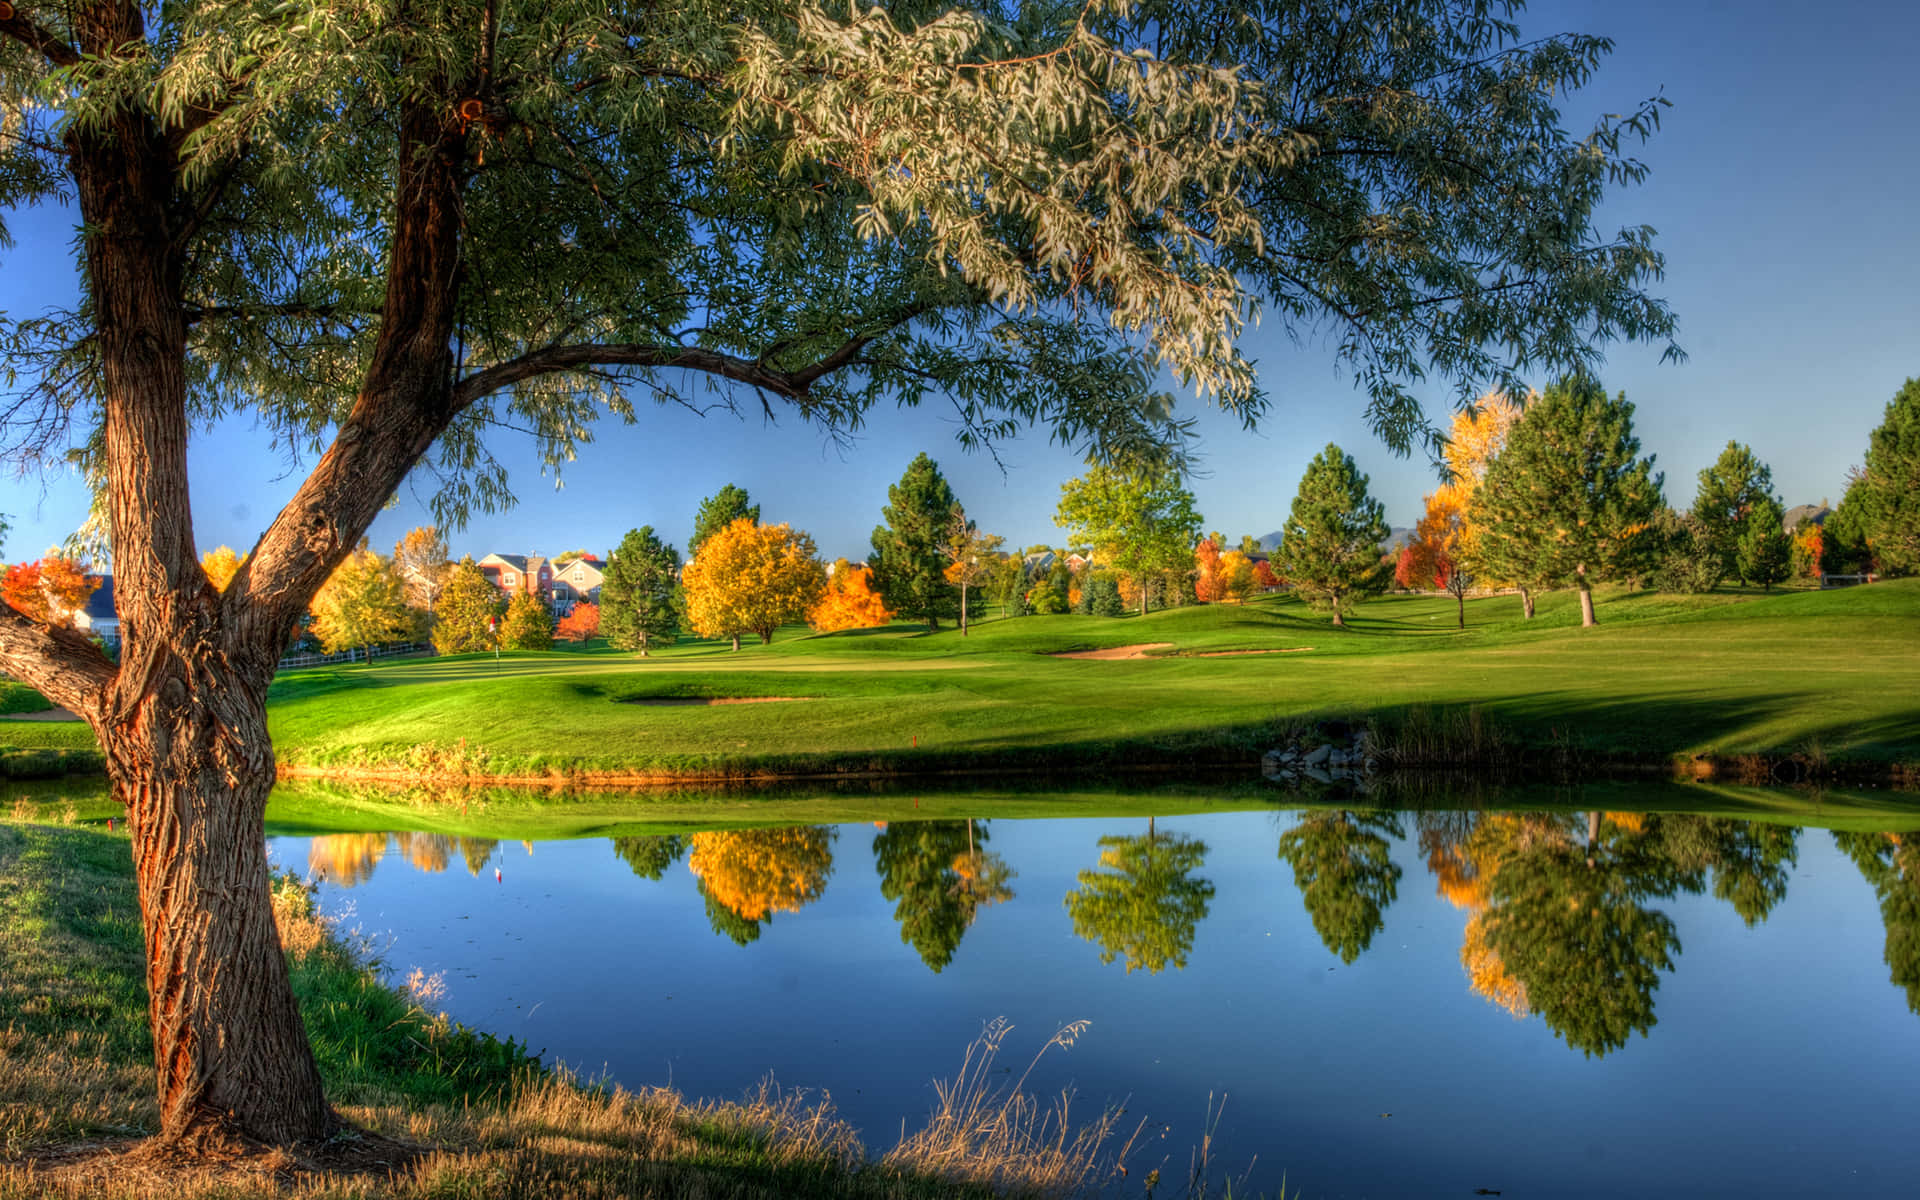 Autumn Scenery Of Hd Golf Course Background